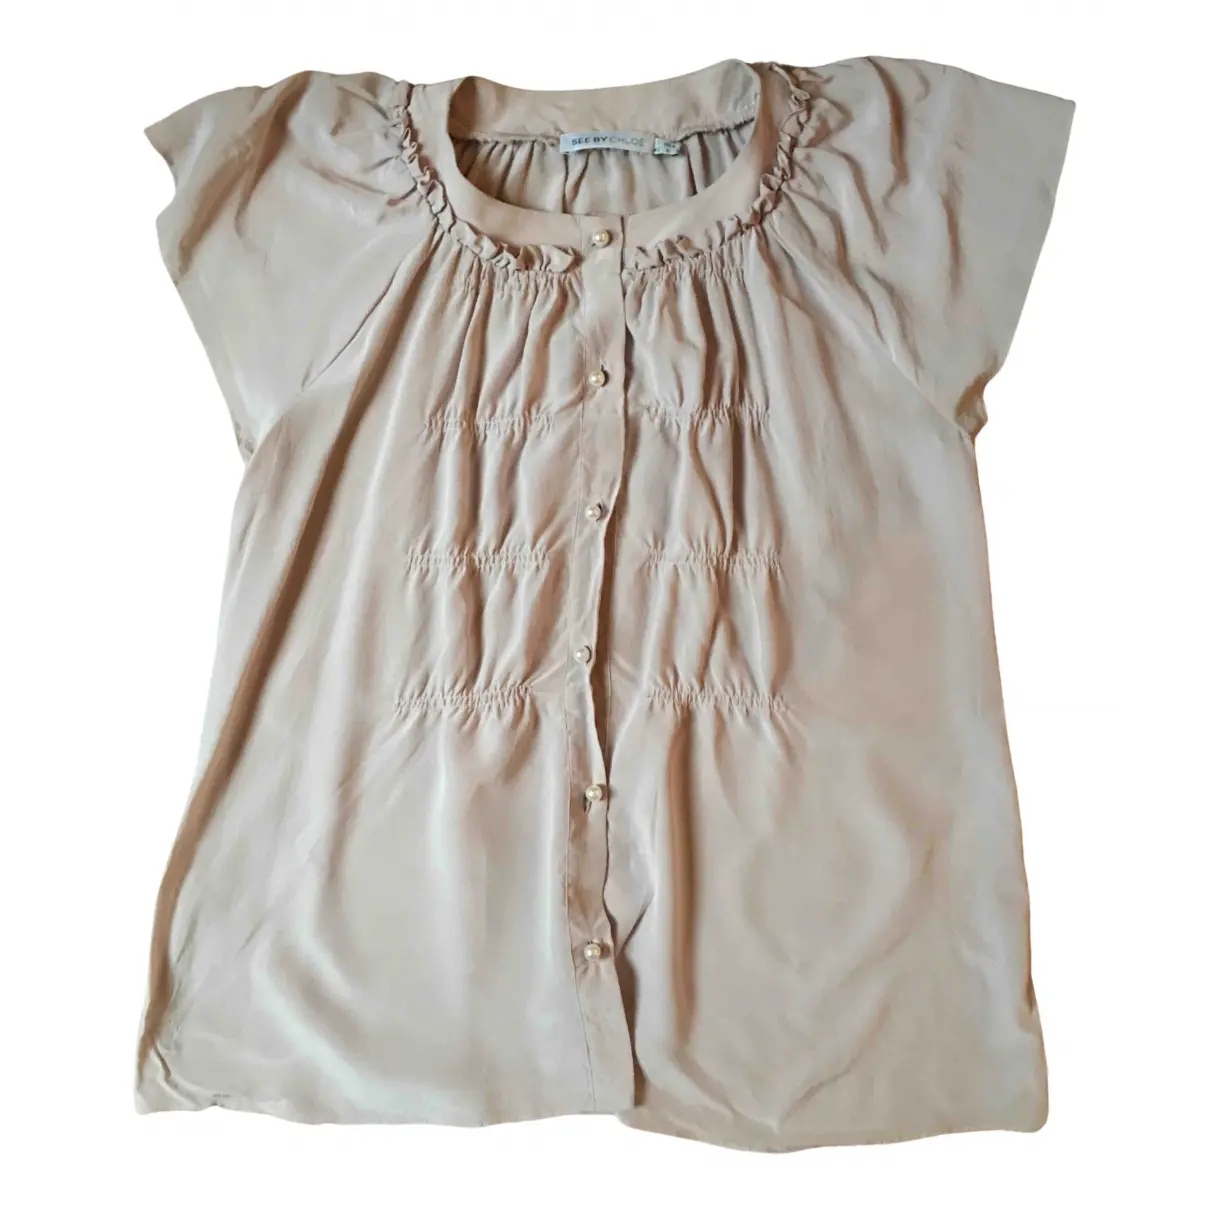 Silk blouse See by Chloé